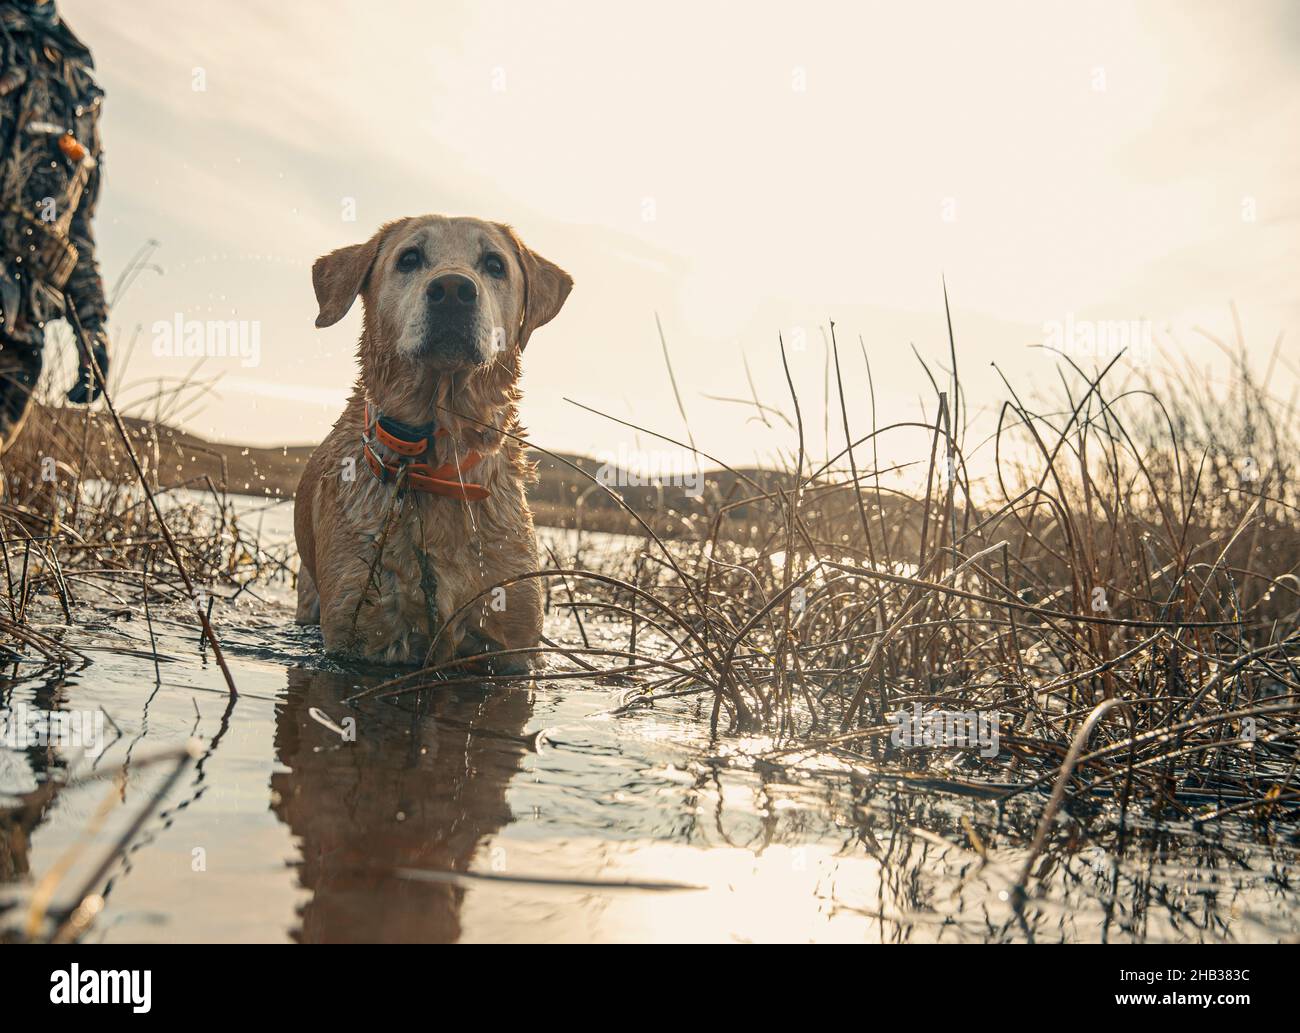 Duck hunting dog wading in water Stock Photo